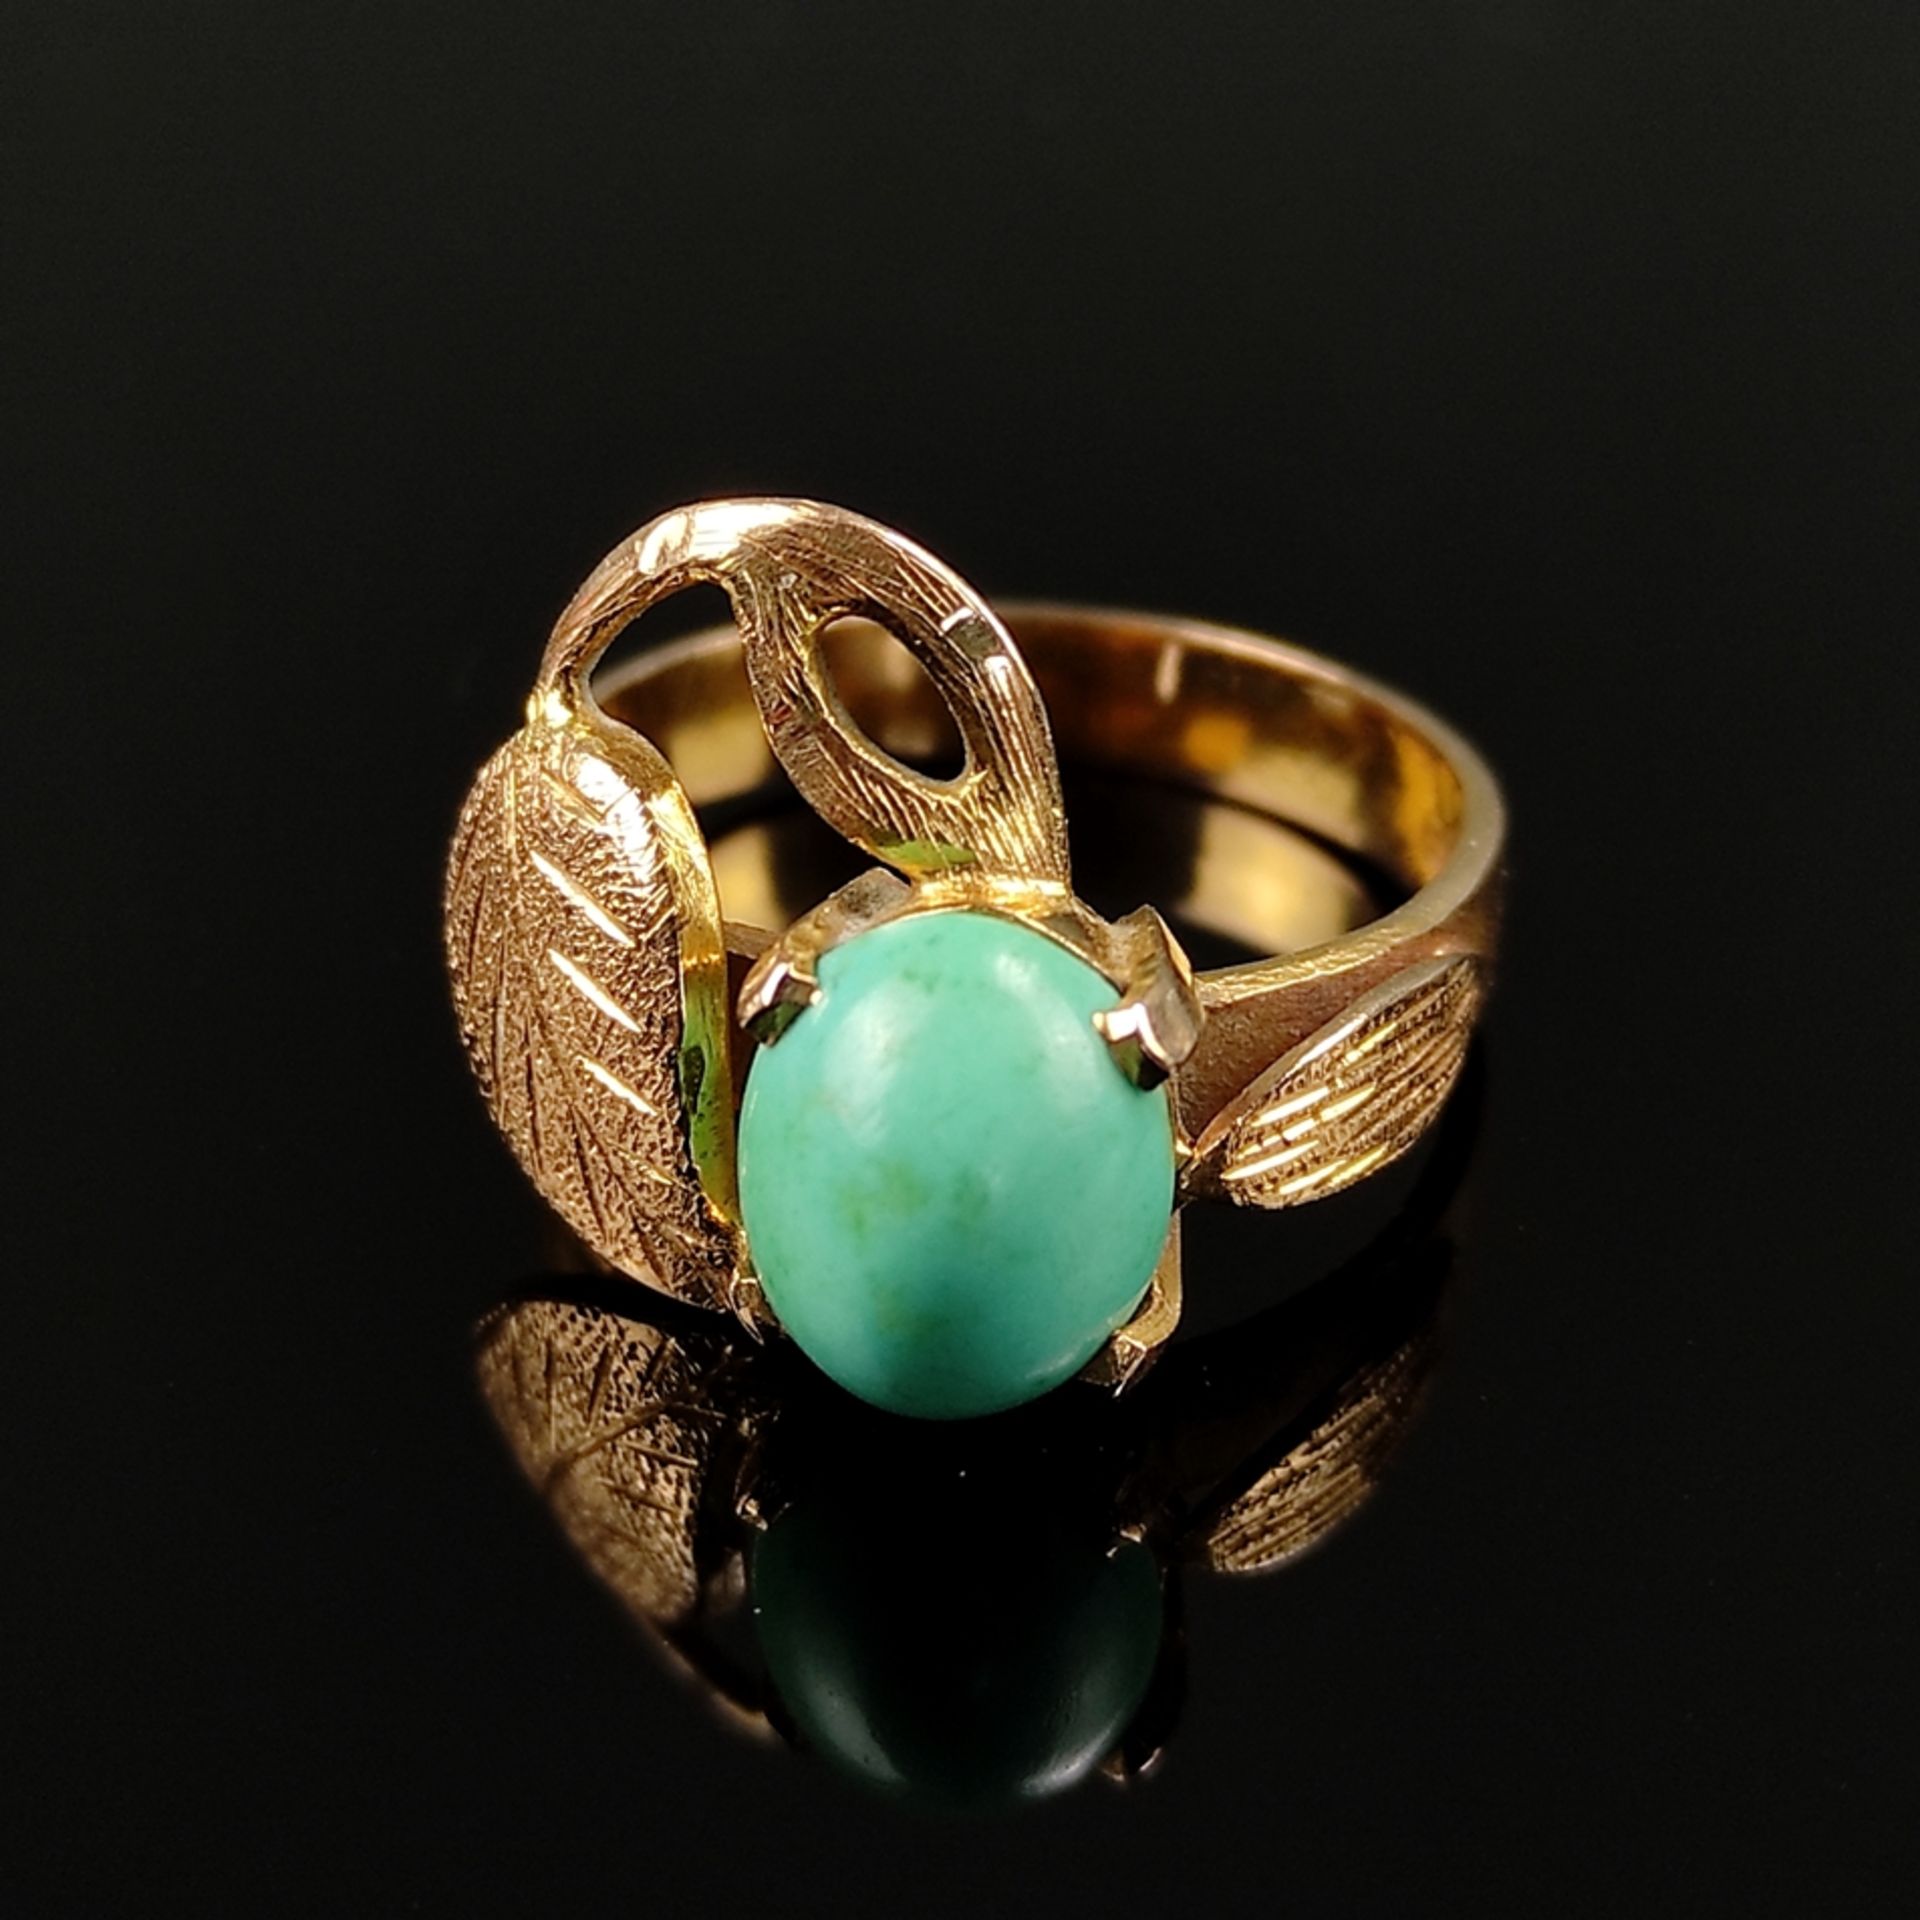 Turquoise ring, 750/18K yellow gold (tested), total weight 5.65g, front with oval turquoise cabocho - Image 2 of 3